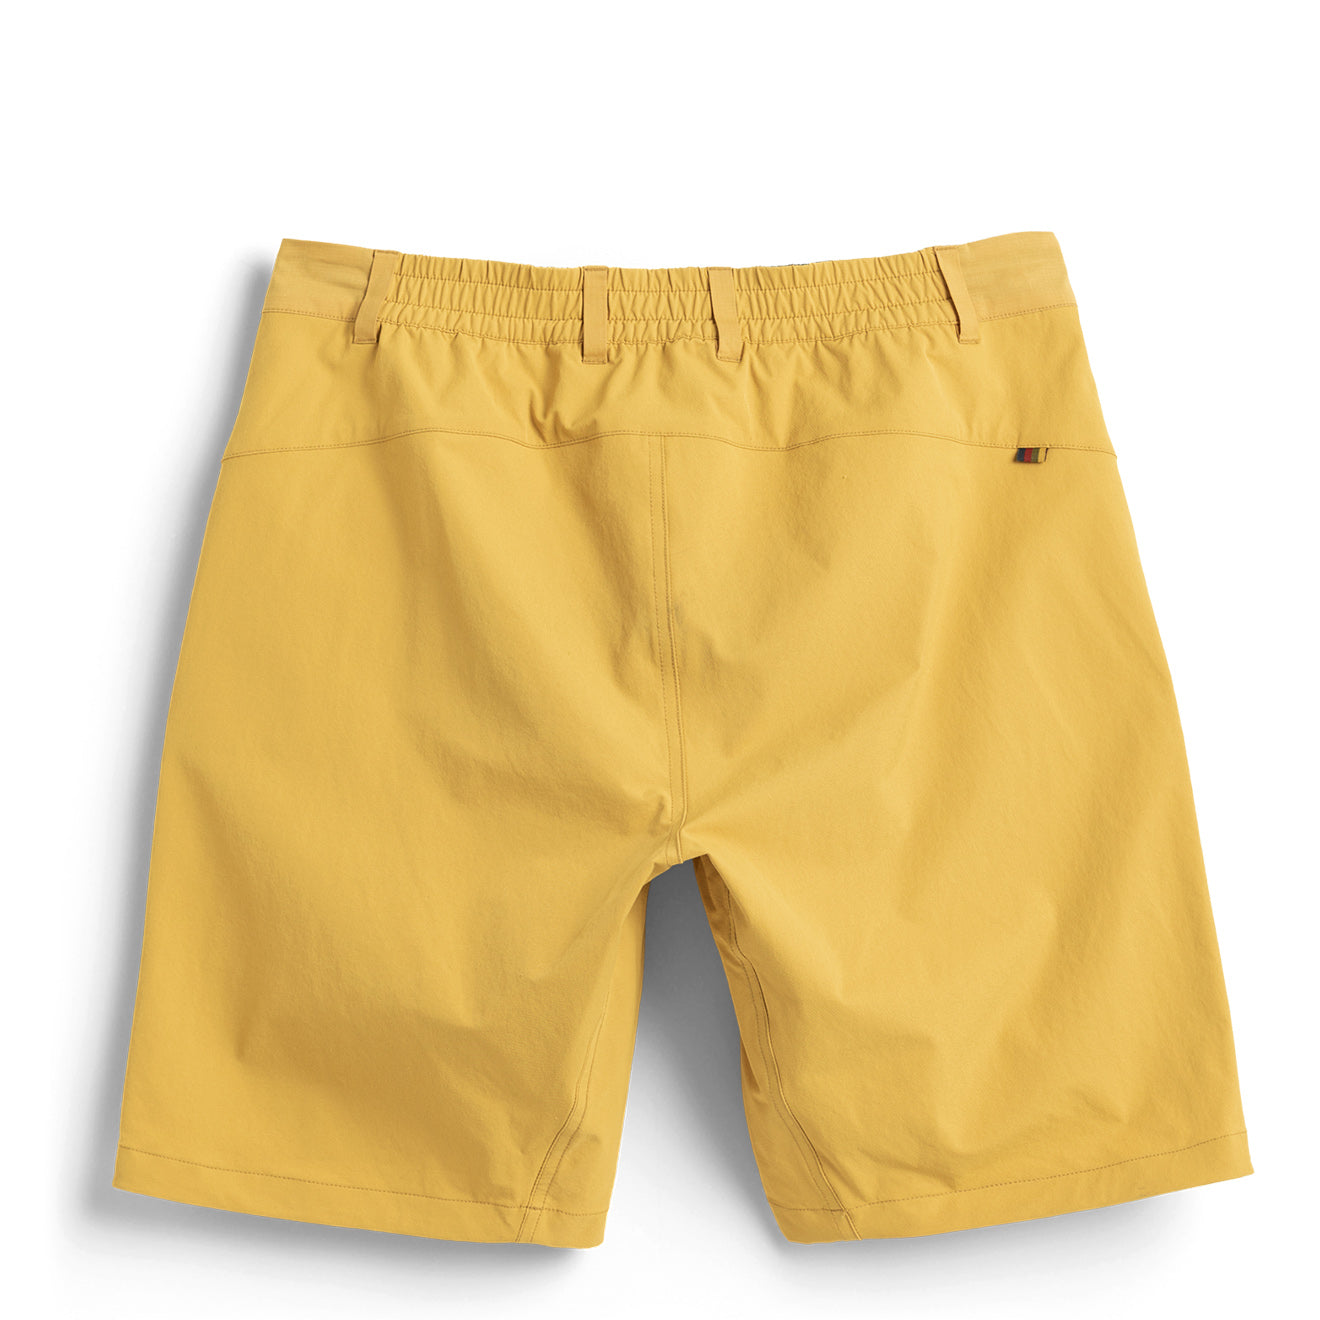 Fjallraven x Specialized Riders Hybrid Shorts Ochre | The Sporting Lodge